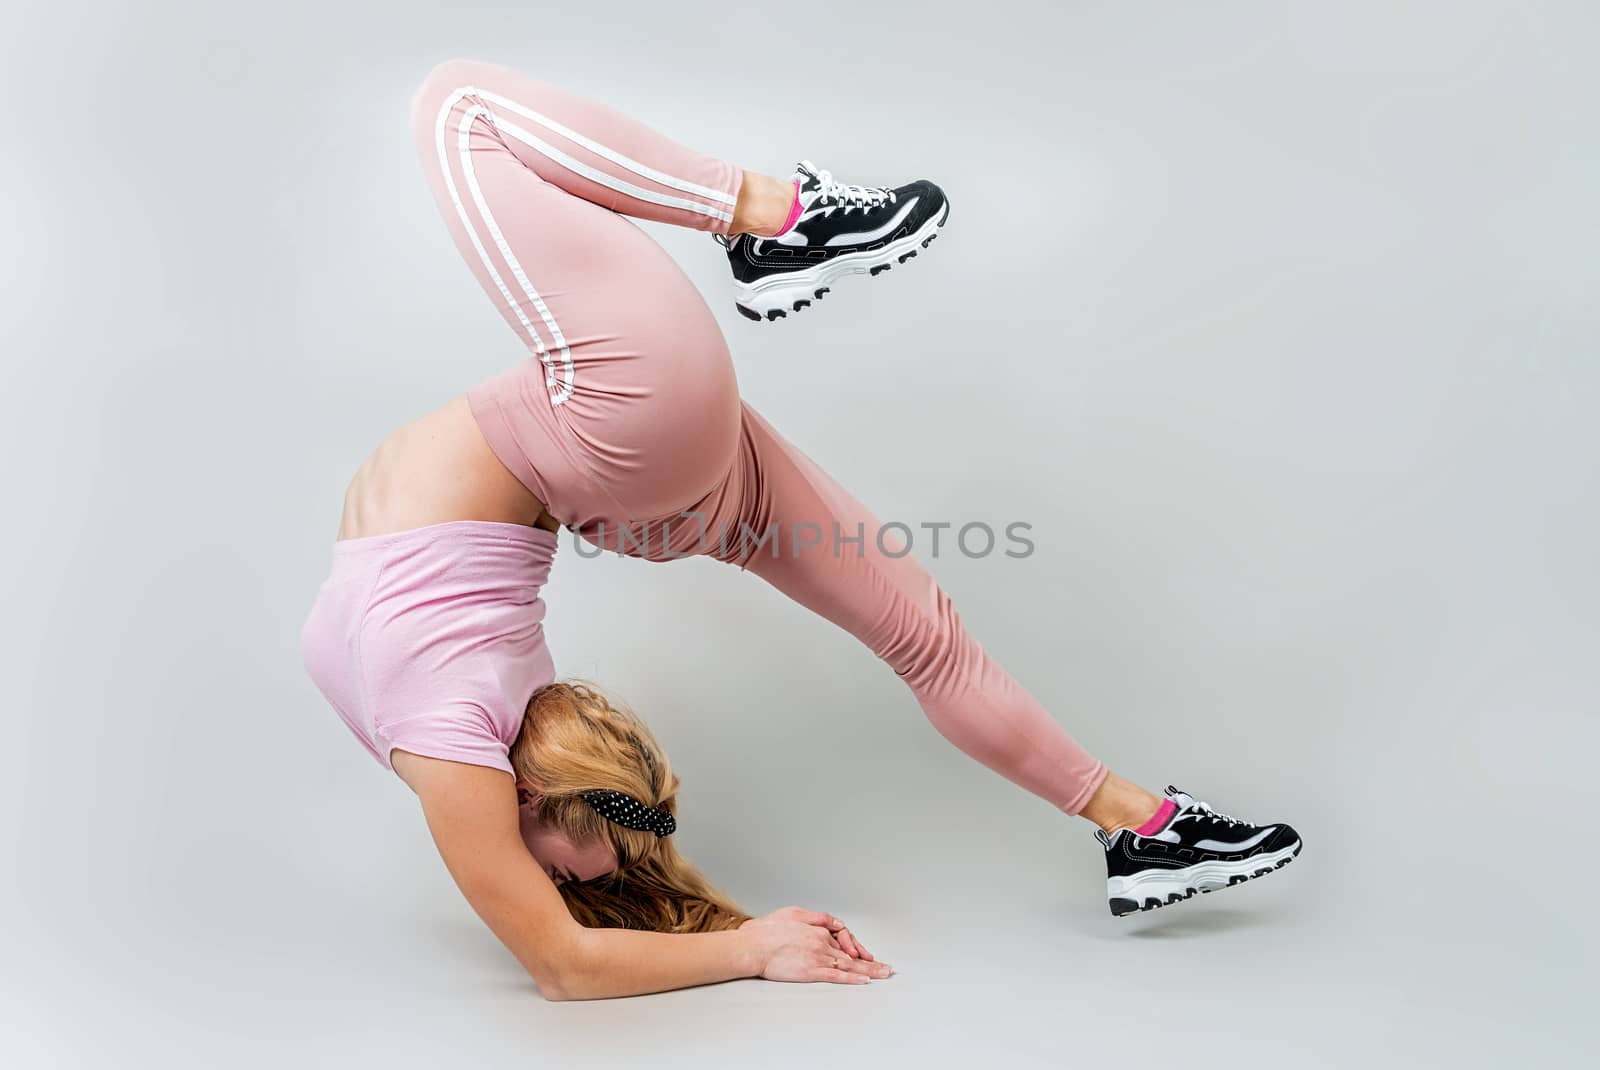 Acrobat woman wearing pink sportswear working out in the studio isolated on gray background by Desperada